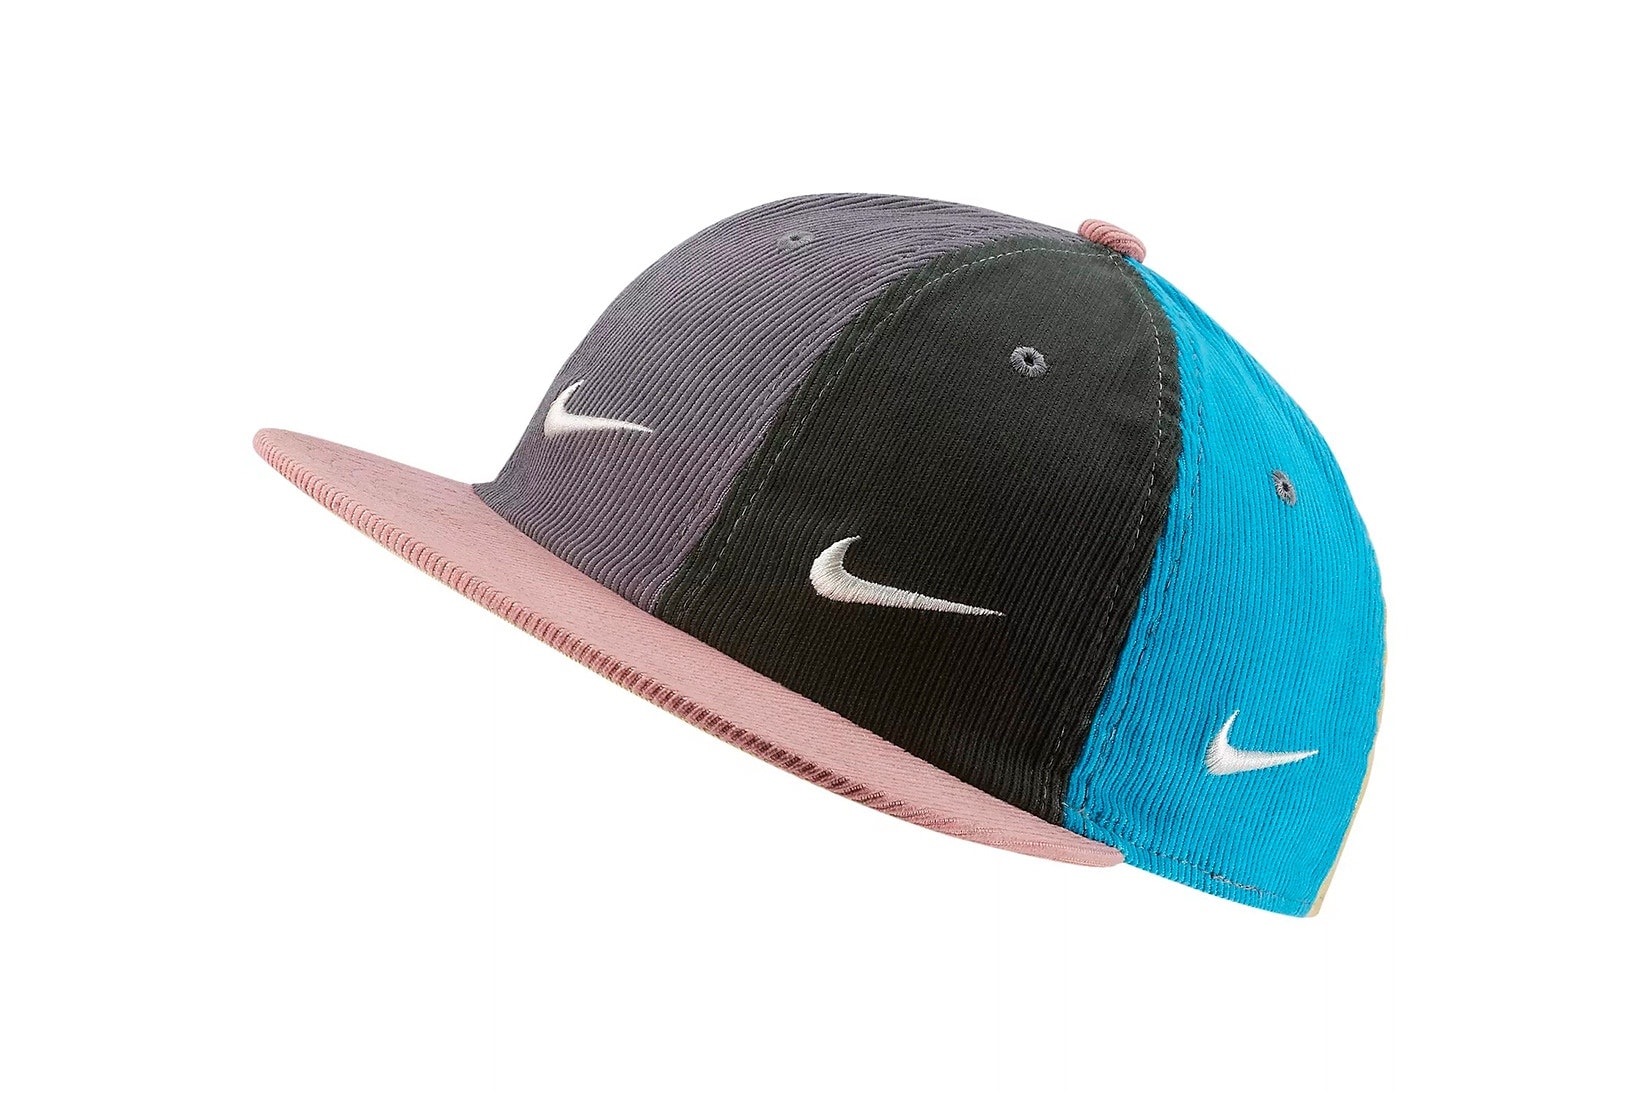 Sean Wotherspoon Nike Air Max Day 2018 1/97 Apparel Cap Hat Corduroy Release Price